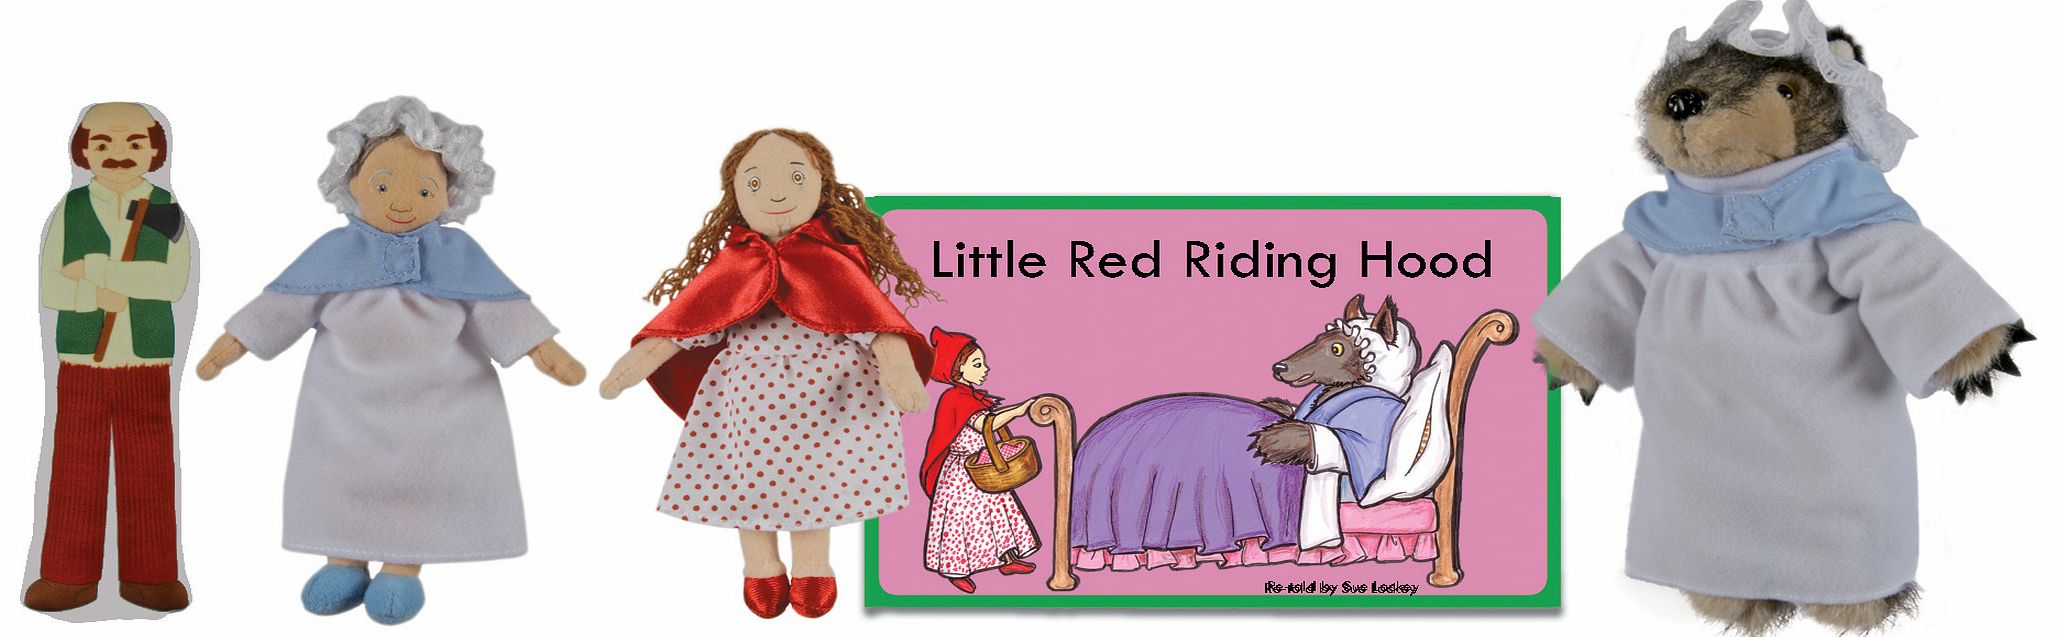 Traditional Story Set - Little Red Riding